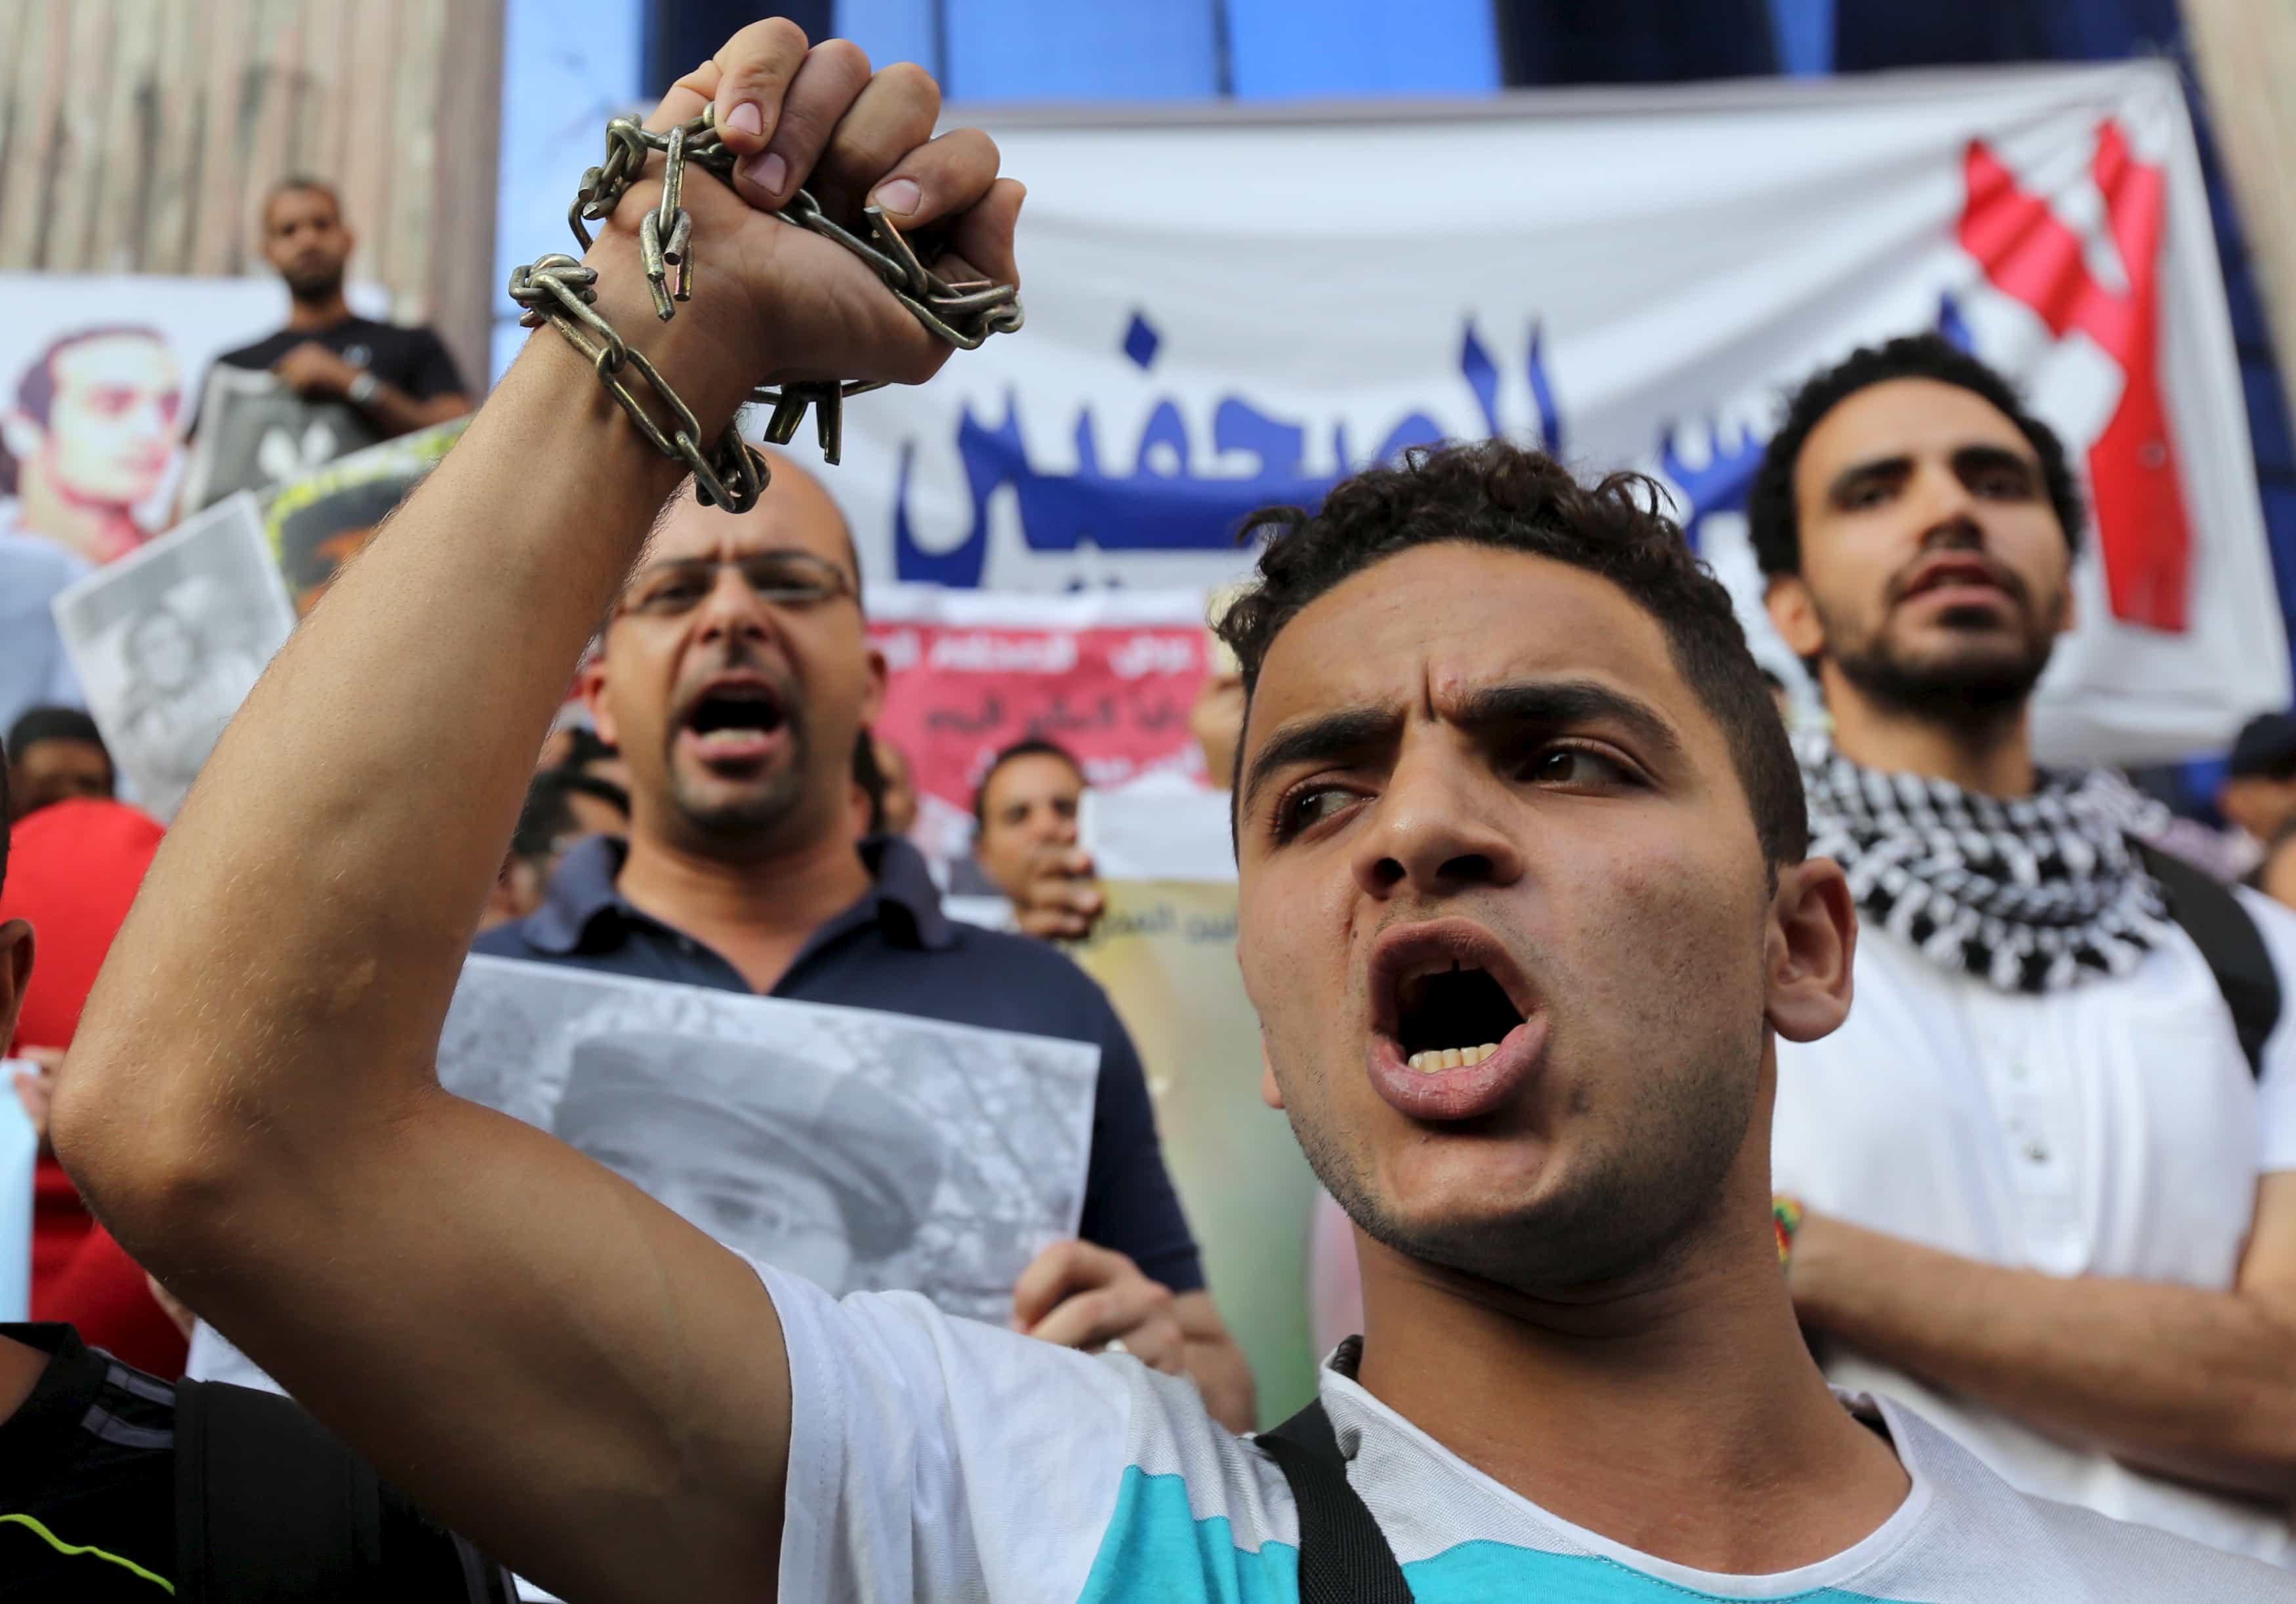 Journalists and members of the April 6 movement protest against the restriction of press freedom and demand the release of detained journalists in front of the Press Syndicate in Cairo June 10, 2015., Mohamed Abd El Ghany/Reuters